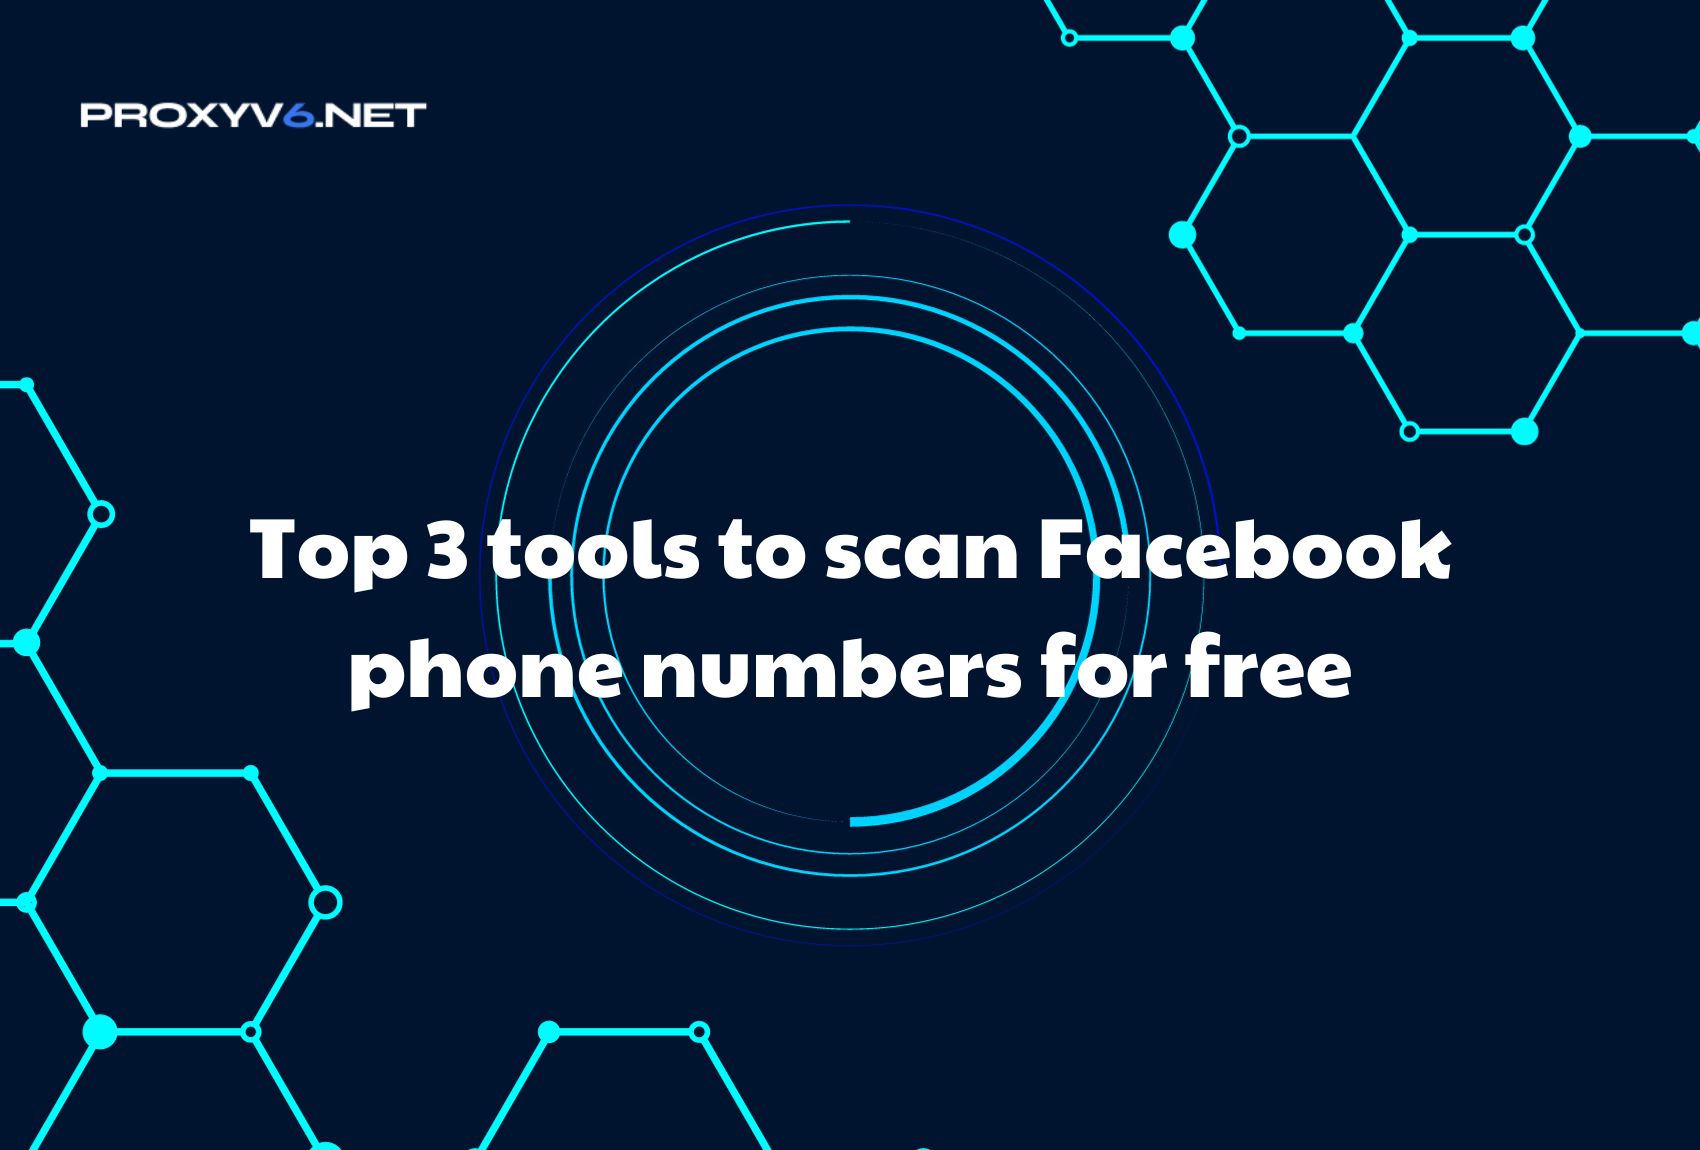 Top 3 tools to scan Facebook phone numbers for free